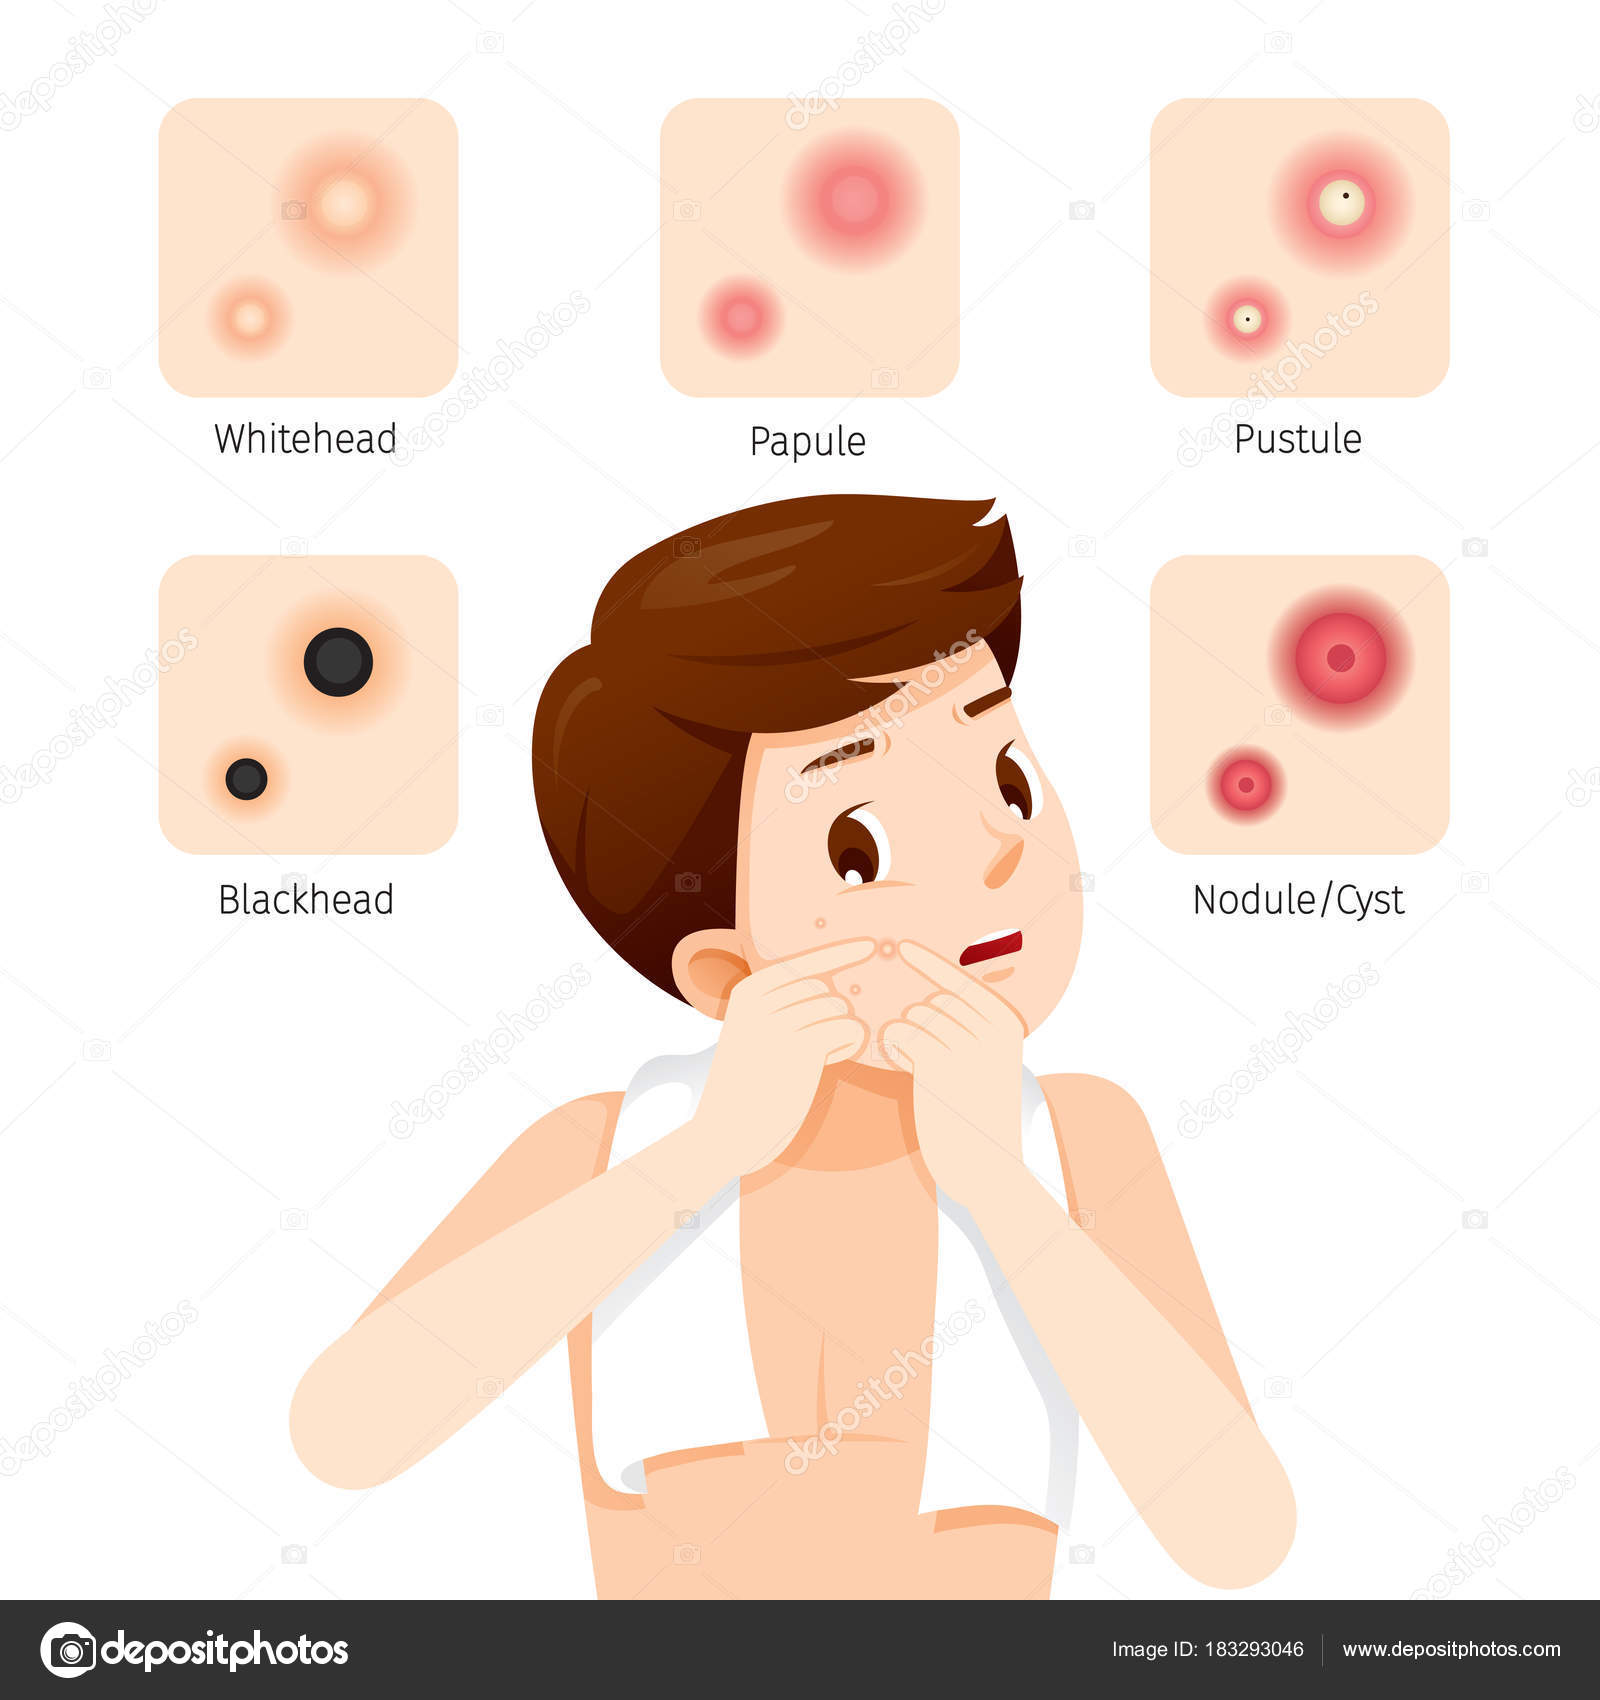 Acne Types And Man With Acne On Face Stock Vector C Matoommi